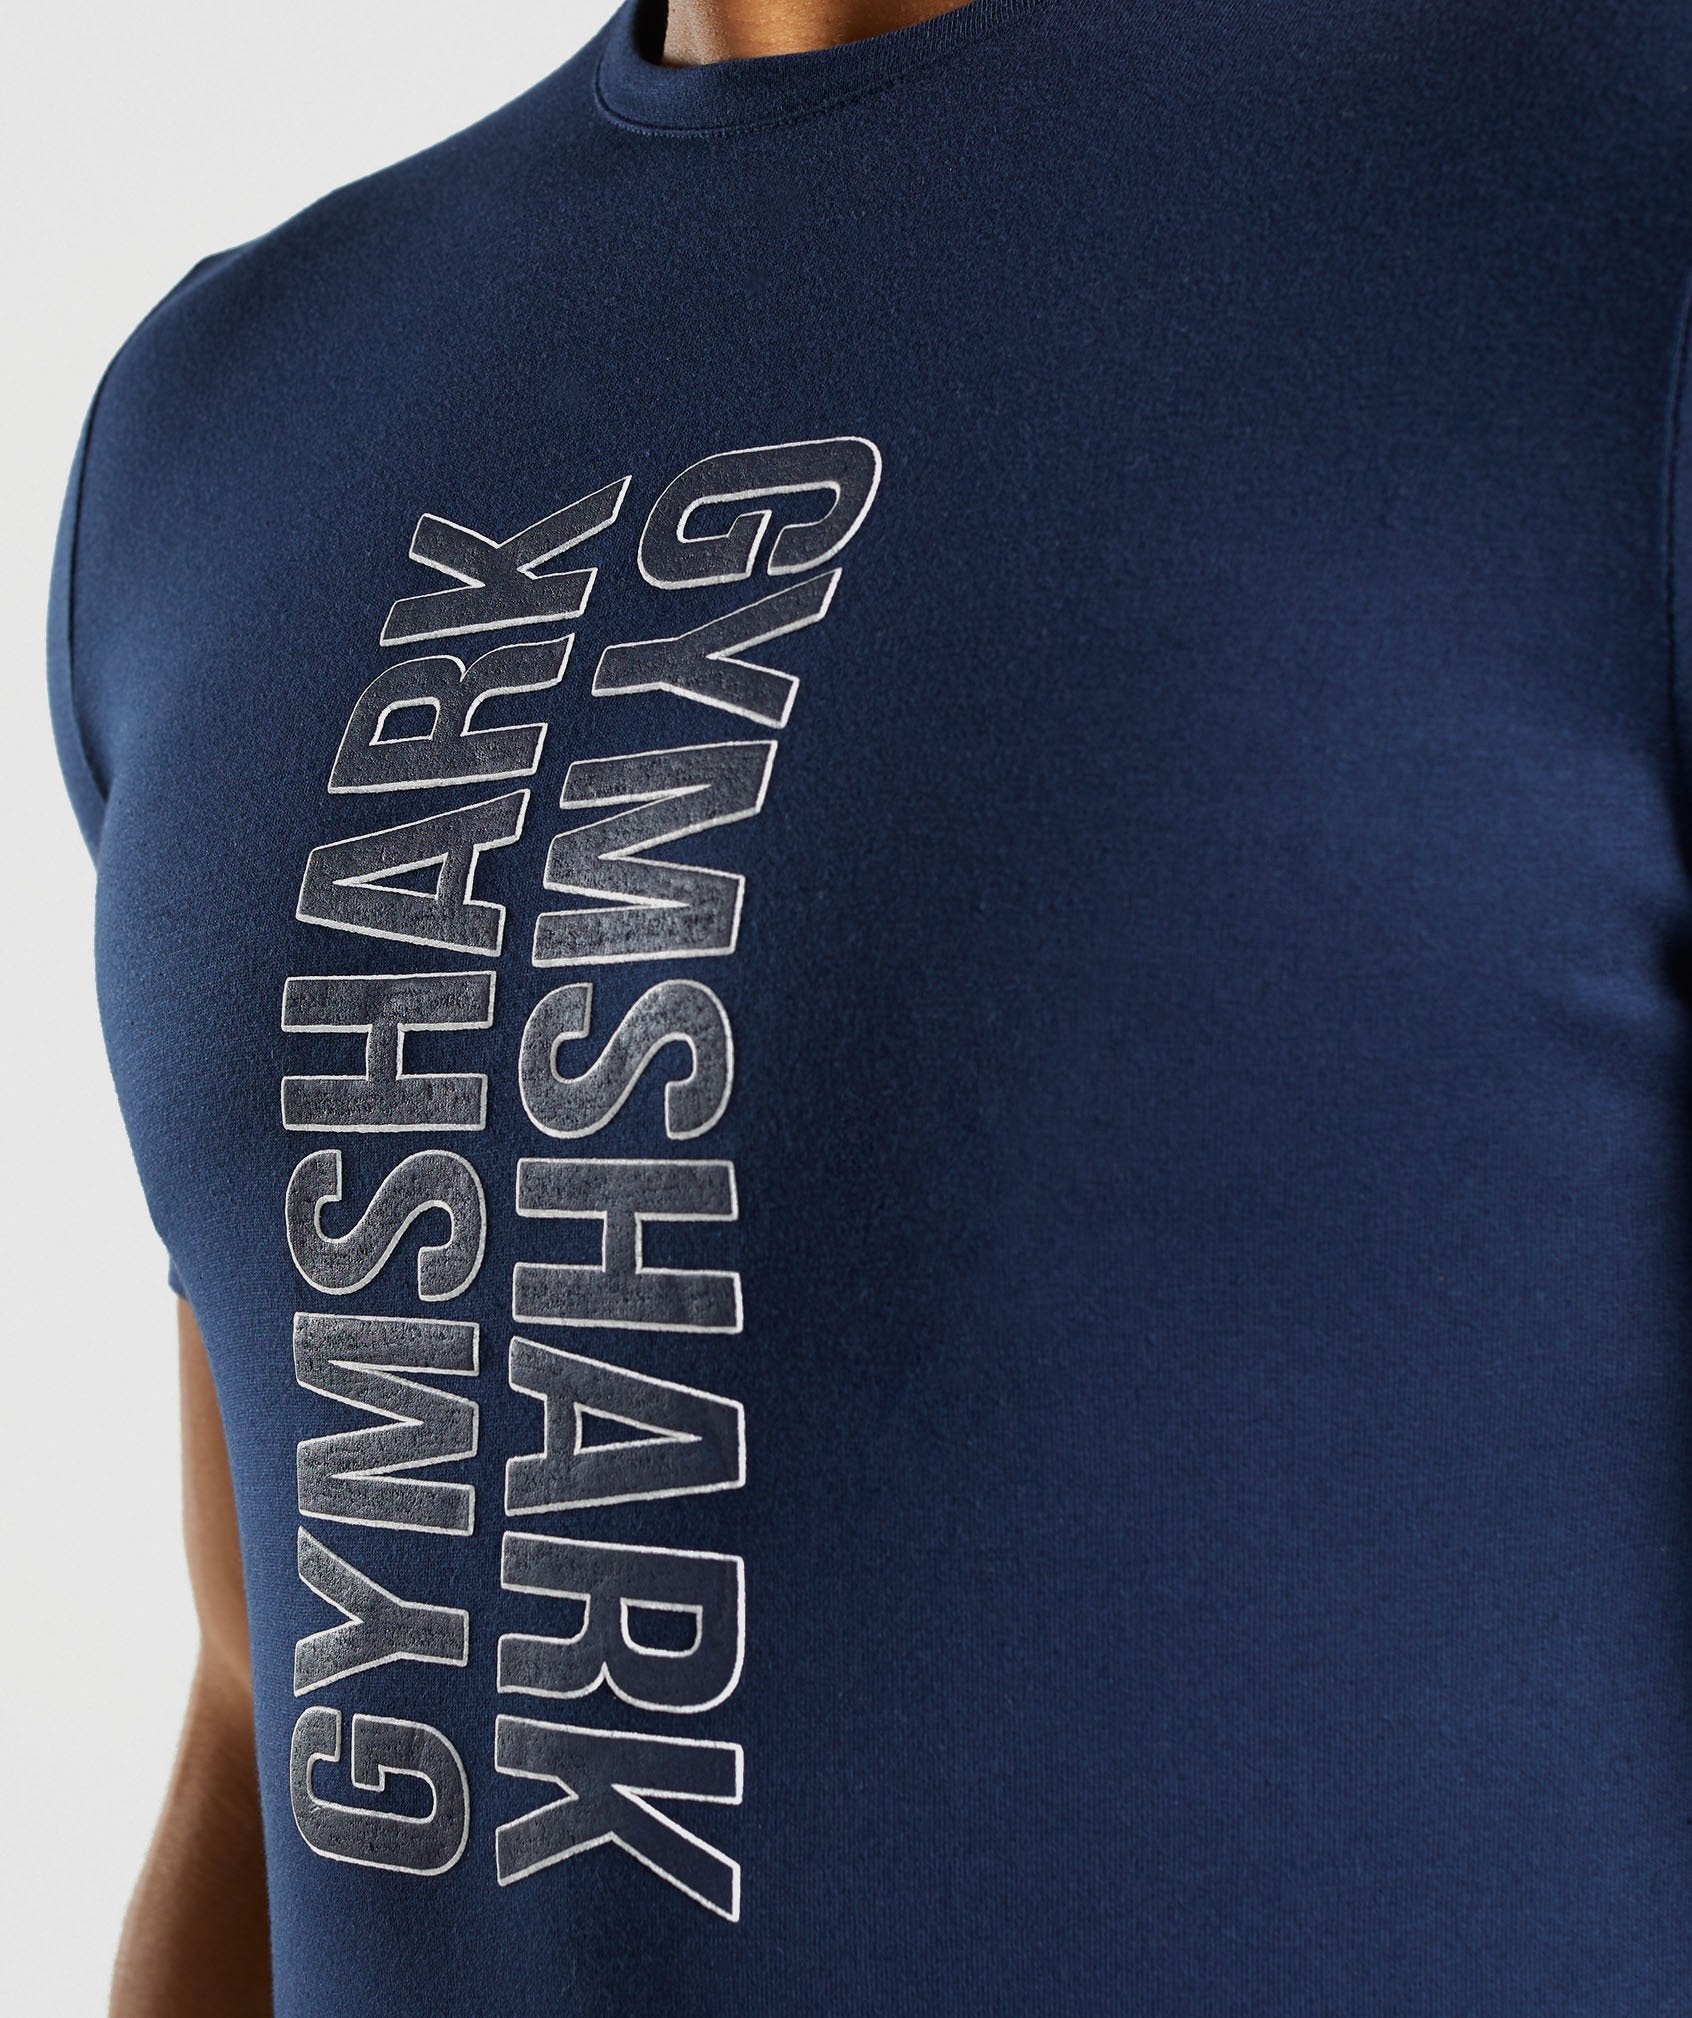 Profile T-Shirt in Sapphire Blue - view 6